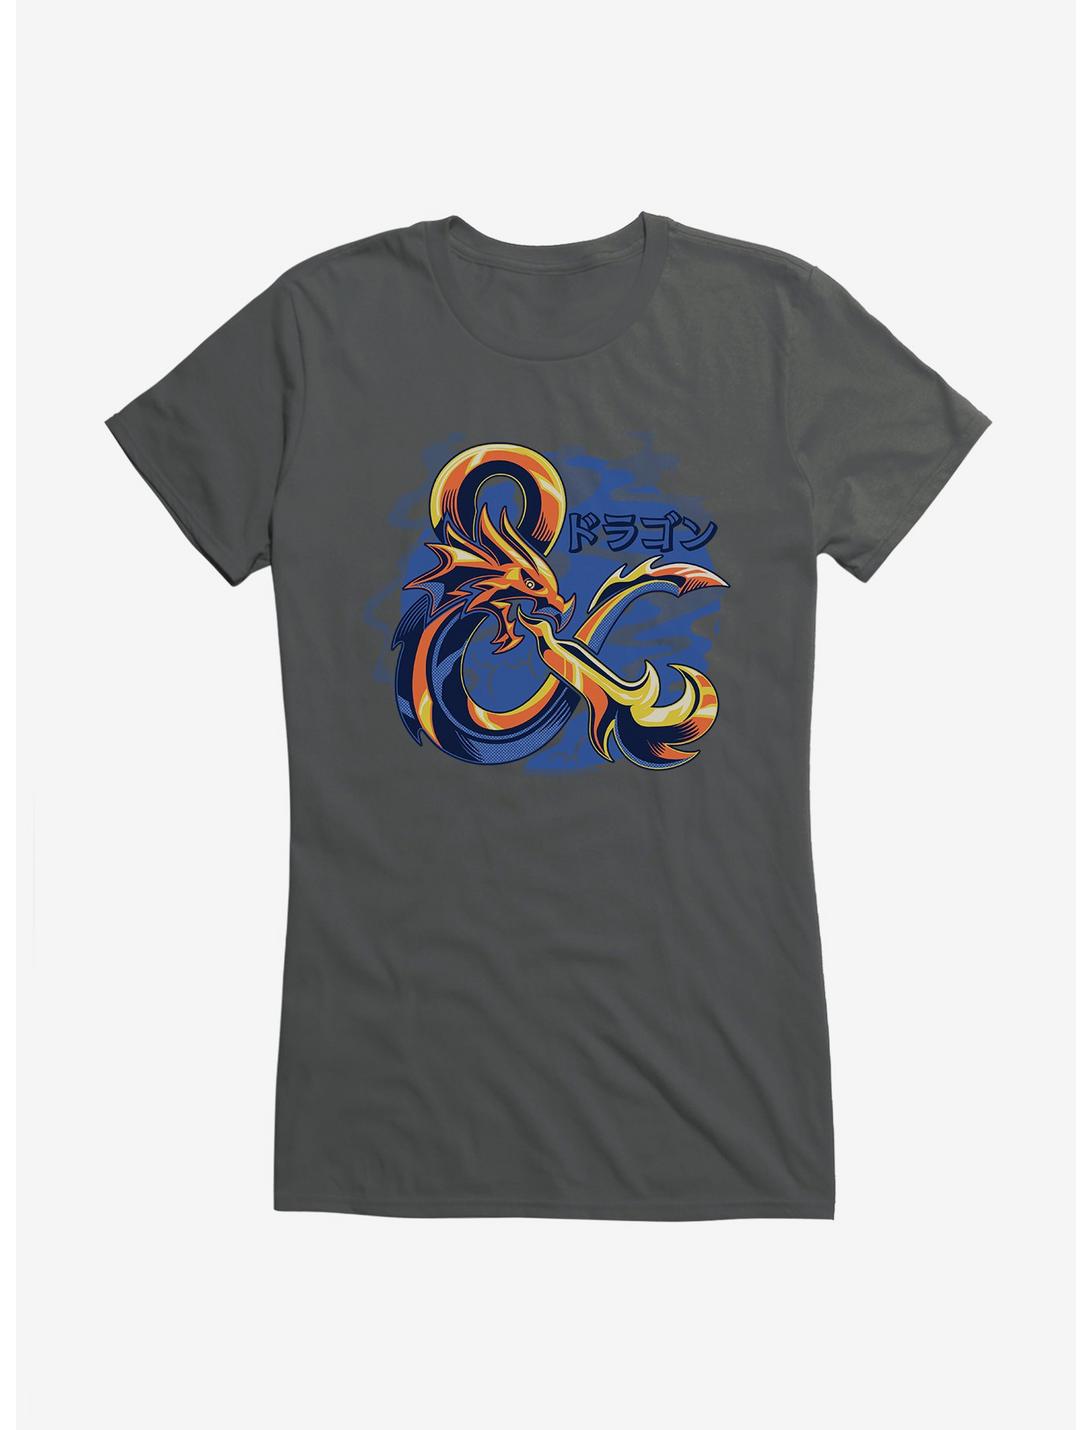 Dungeons & Dragons Gold Ampersand Asian Letters Girls T-Shirt, CHARCOAL, hi-res